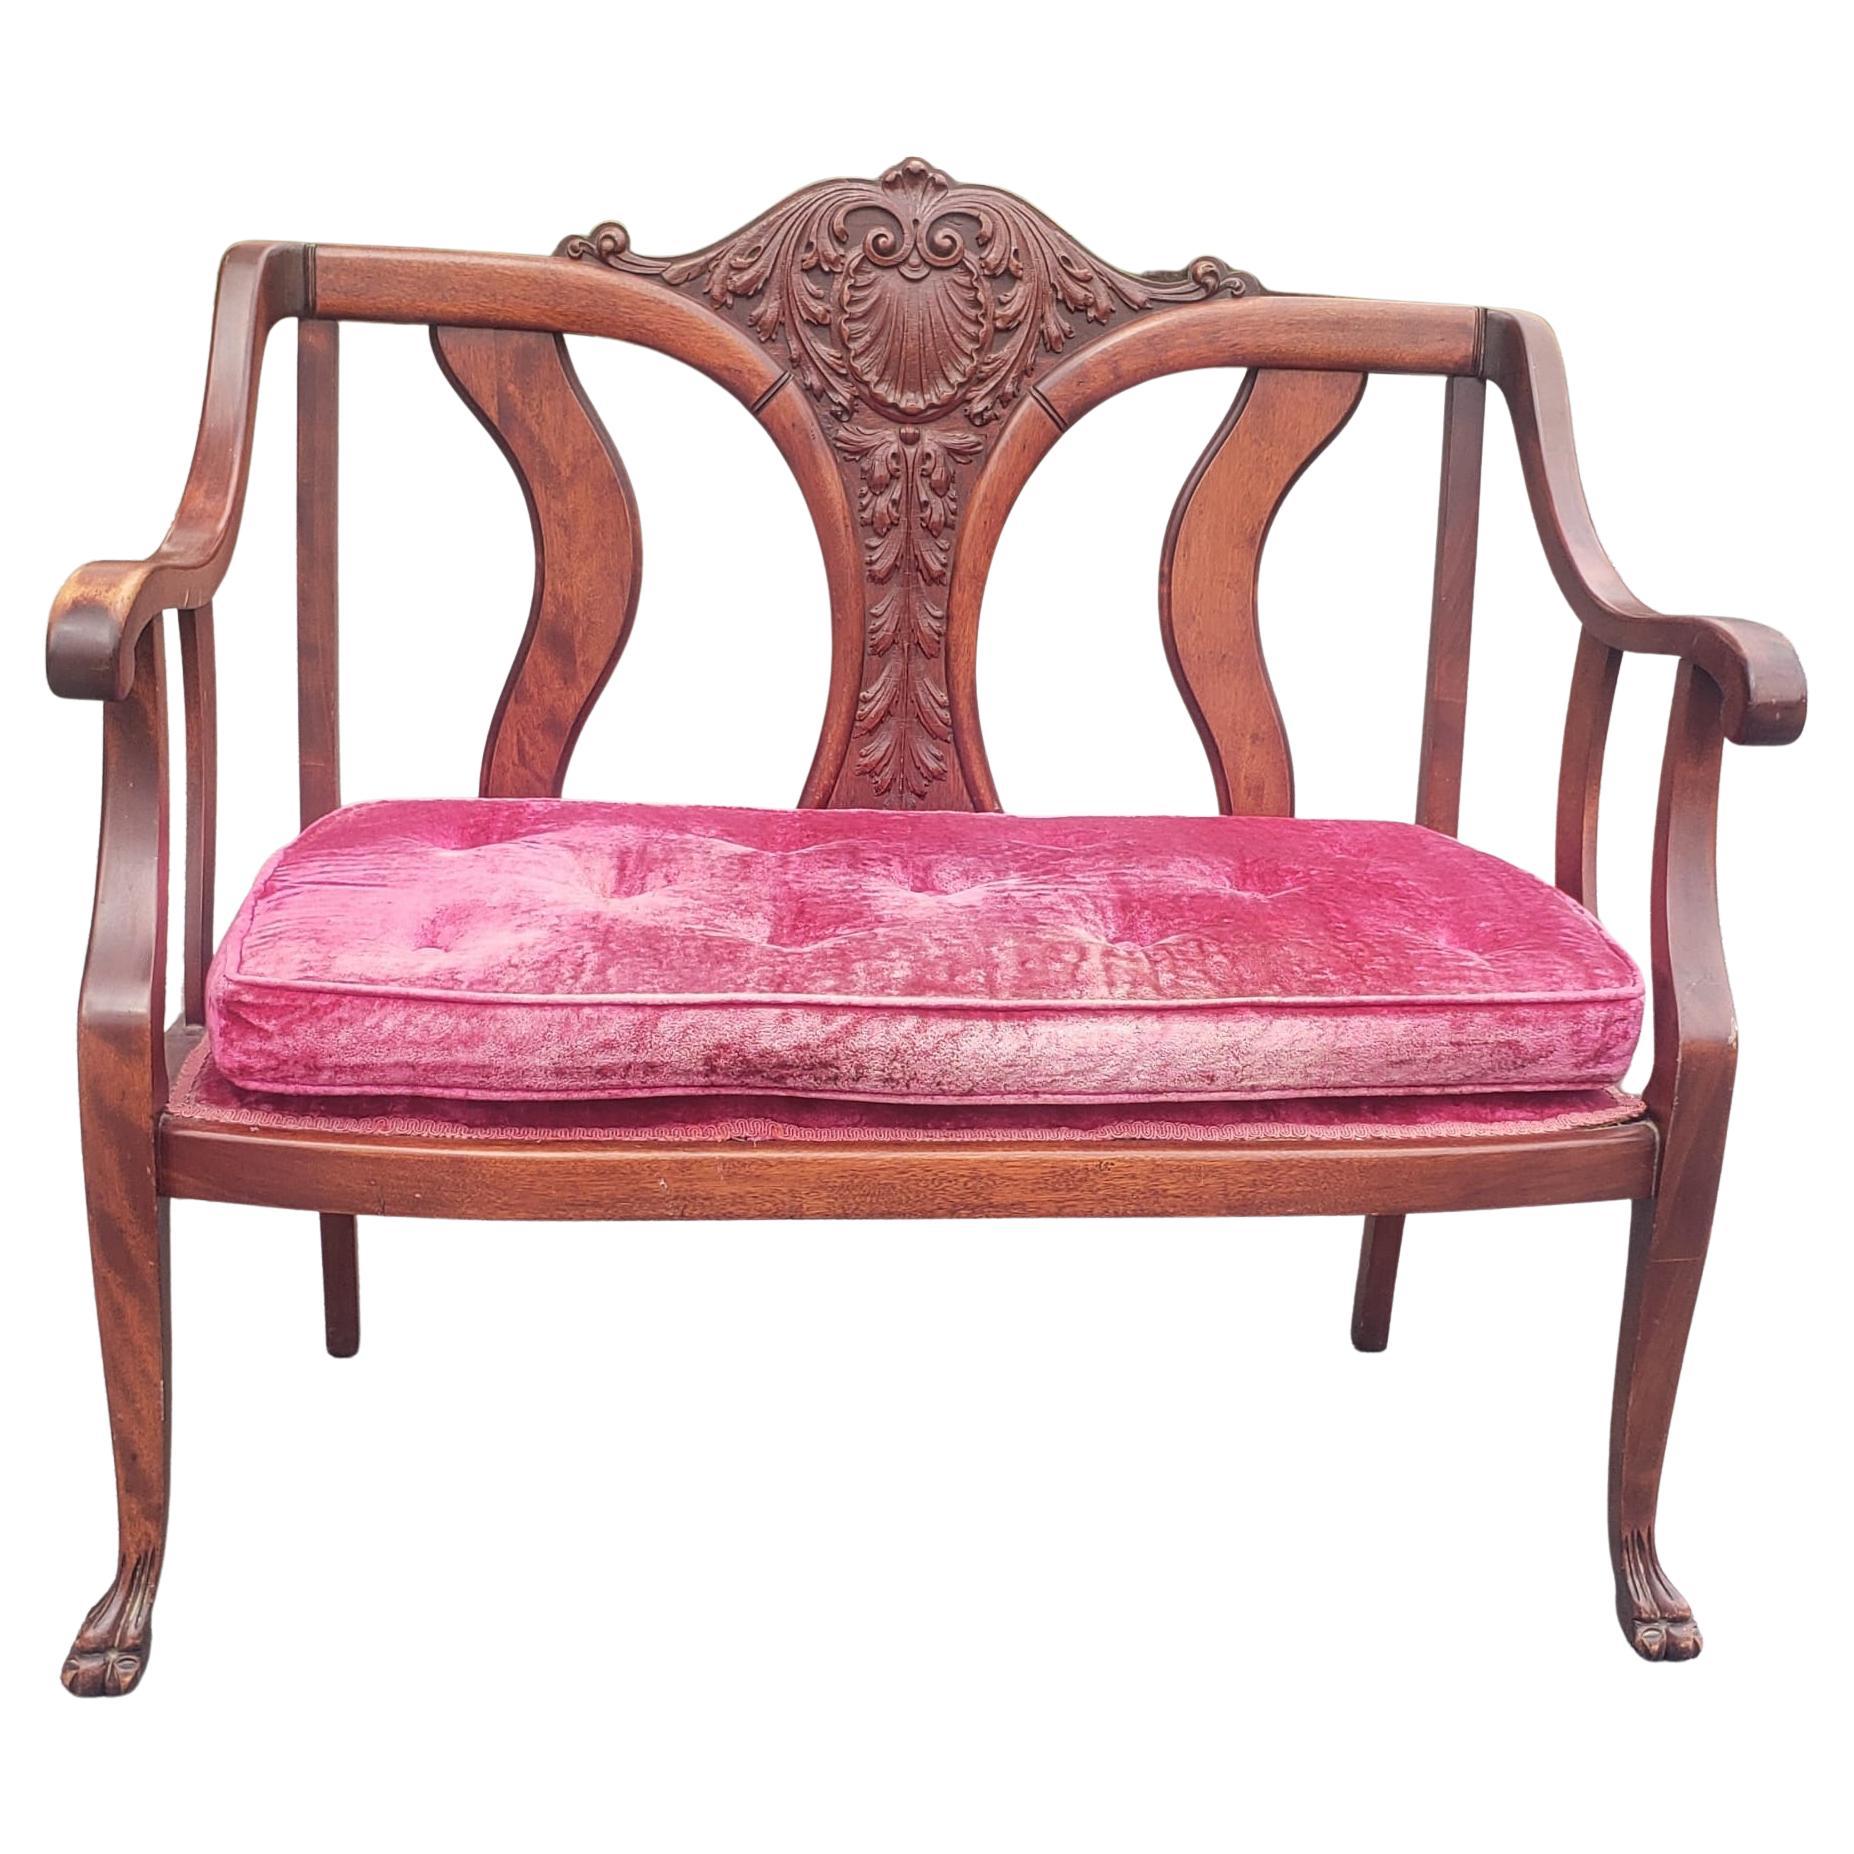 Early 20th Century Victorian Style Carved Mahogany and Upholstered Settee For Sale